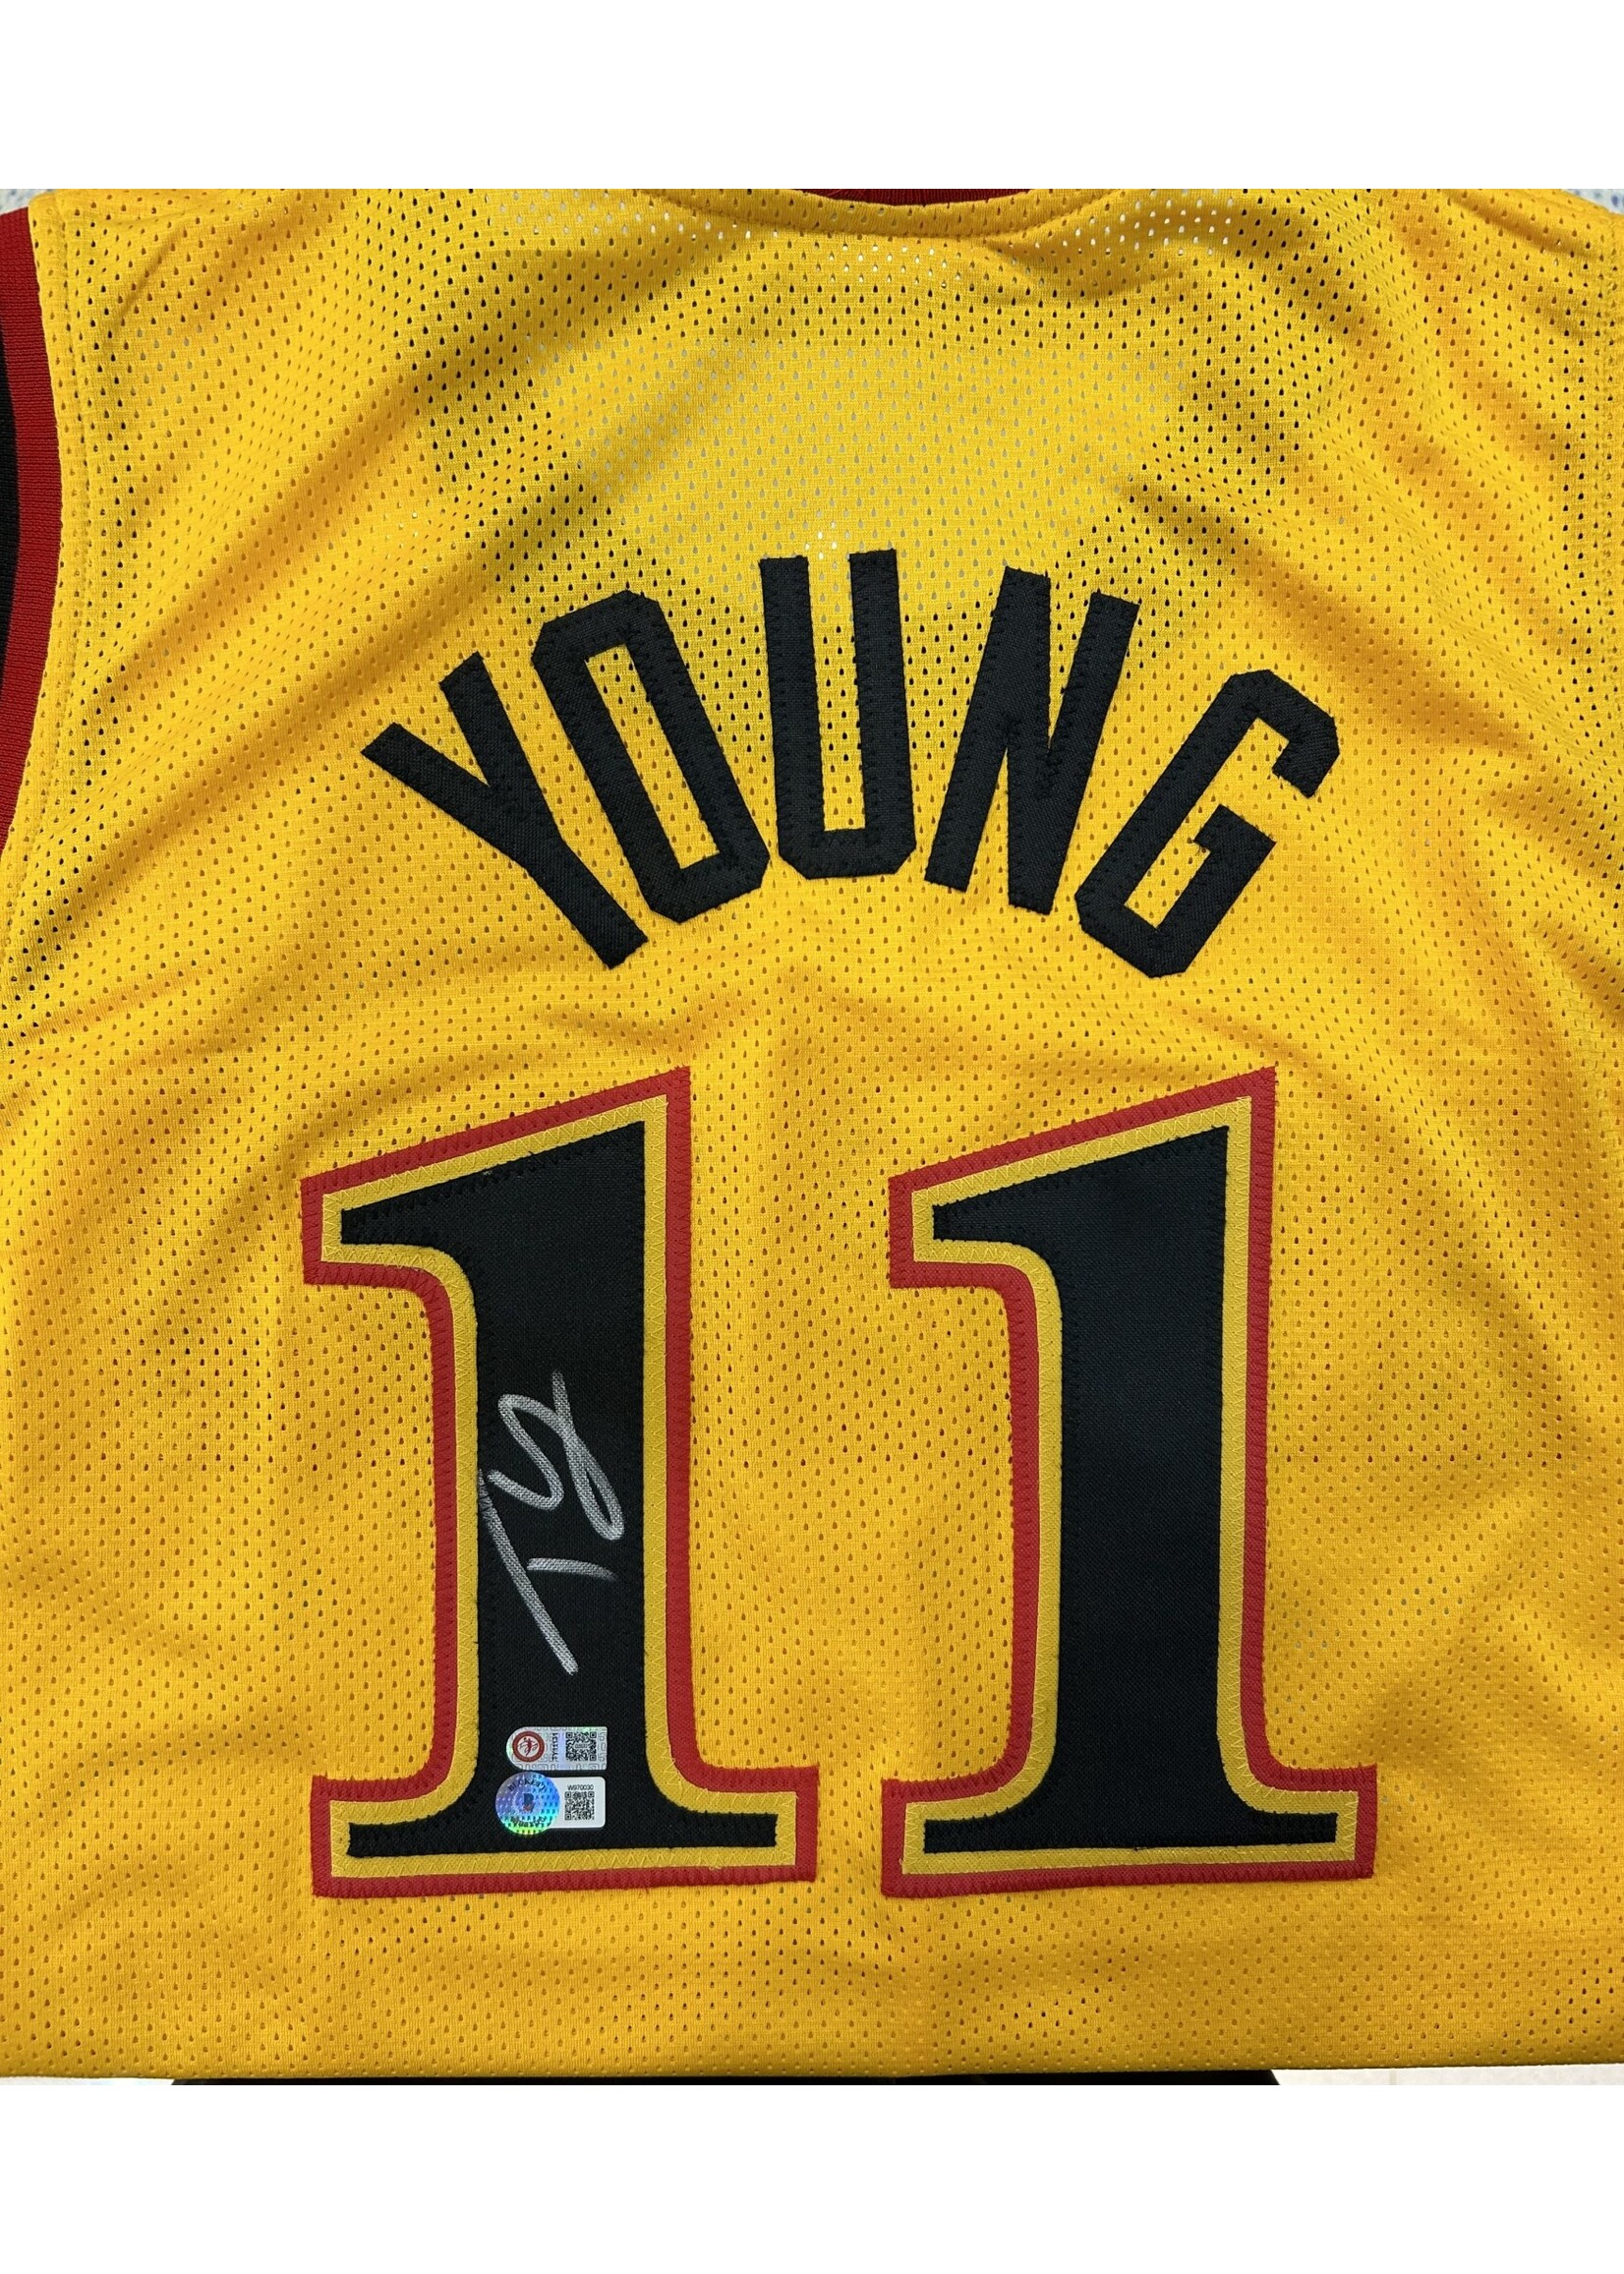 Trae Young Jersey E